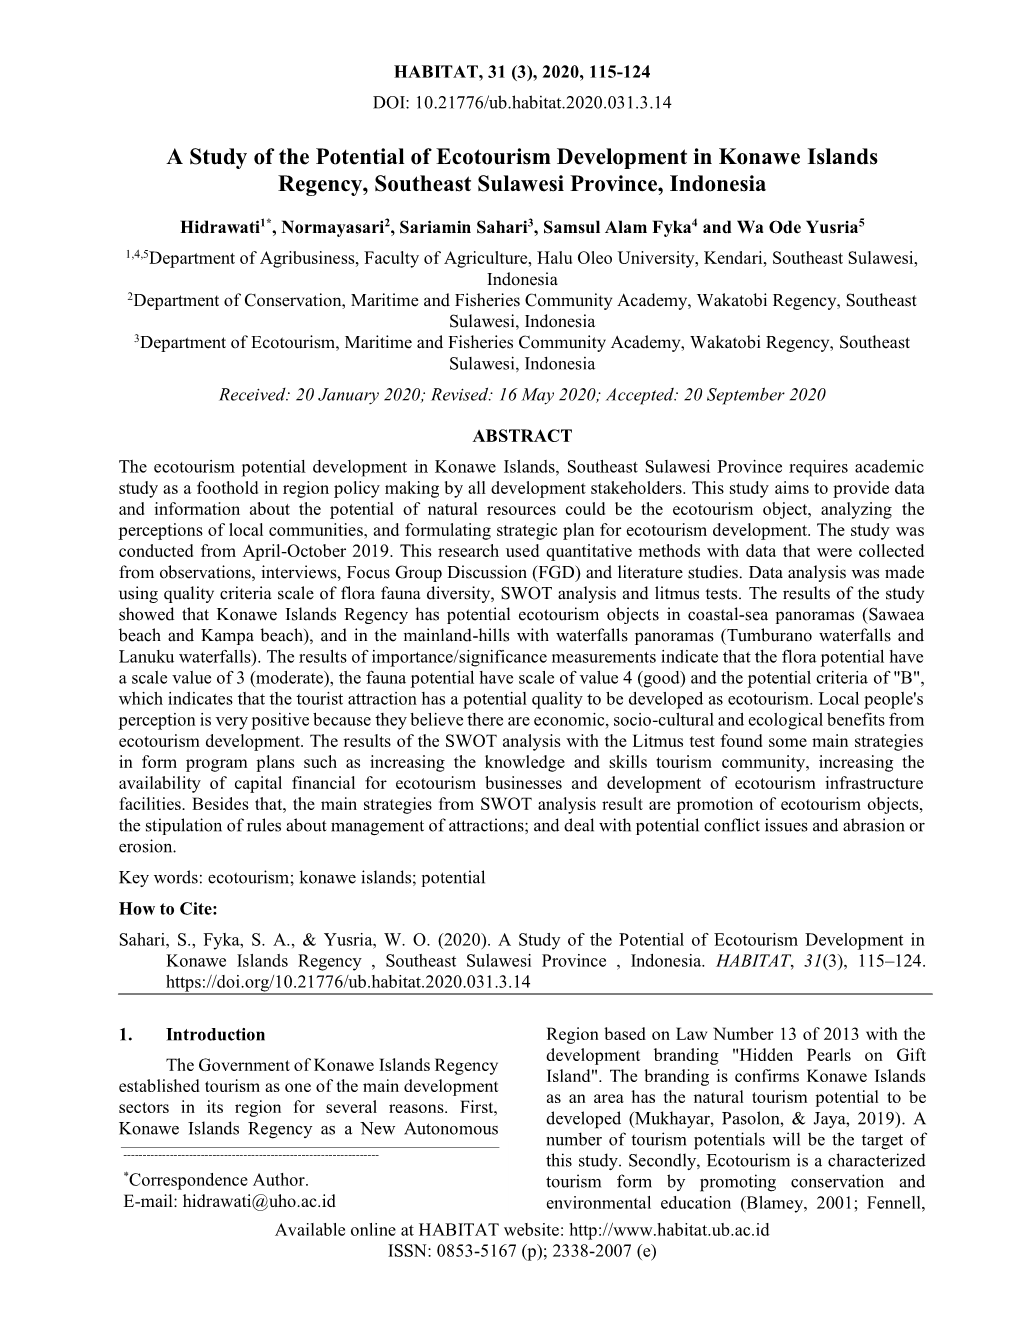 A Study of the Potential of Ecotourism Development in Konawe Islands Regency, Southeast Sulawesi Province, Indonesia